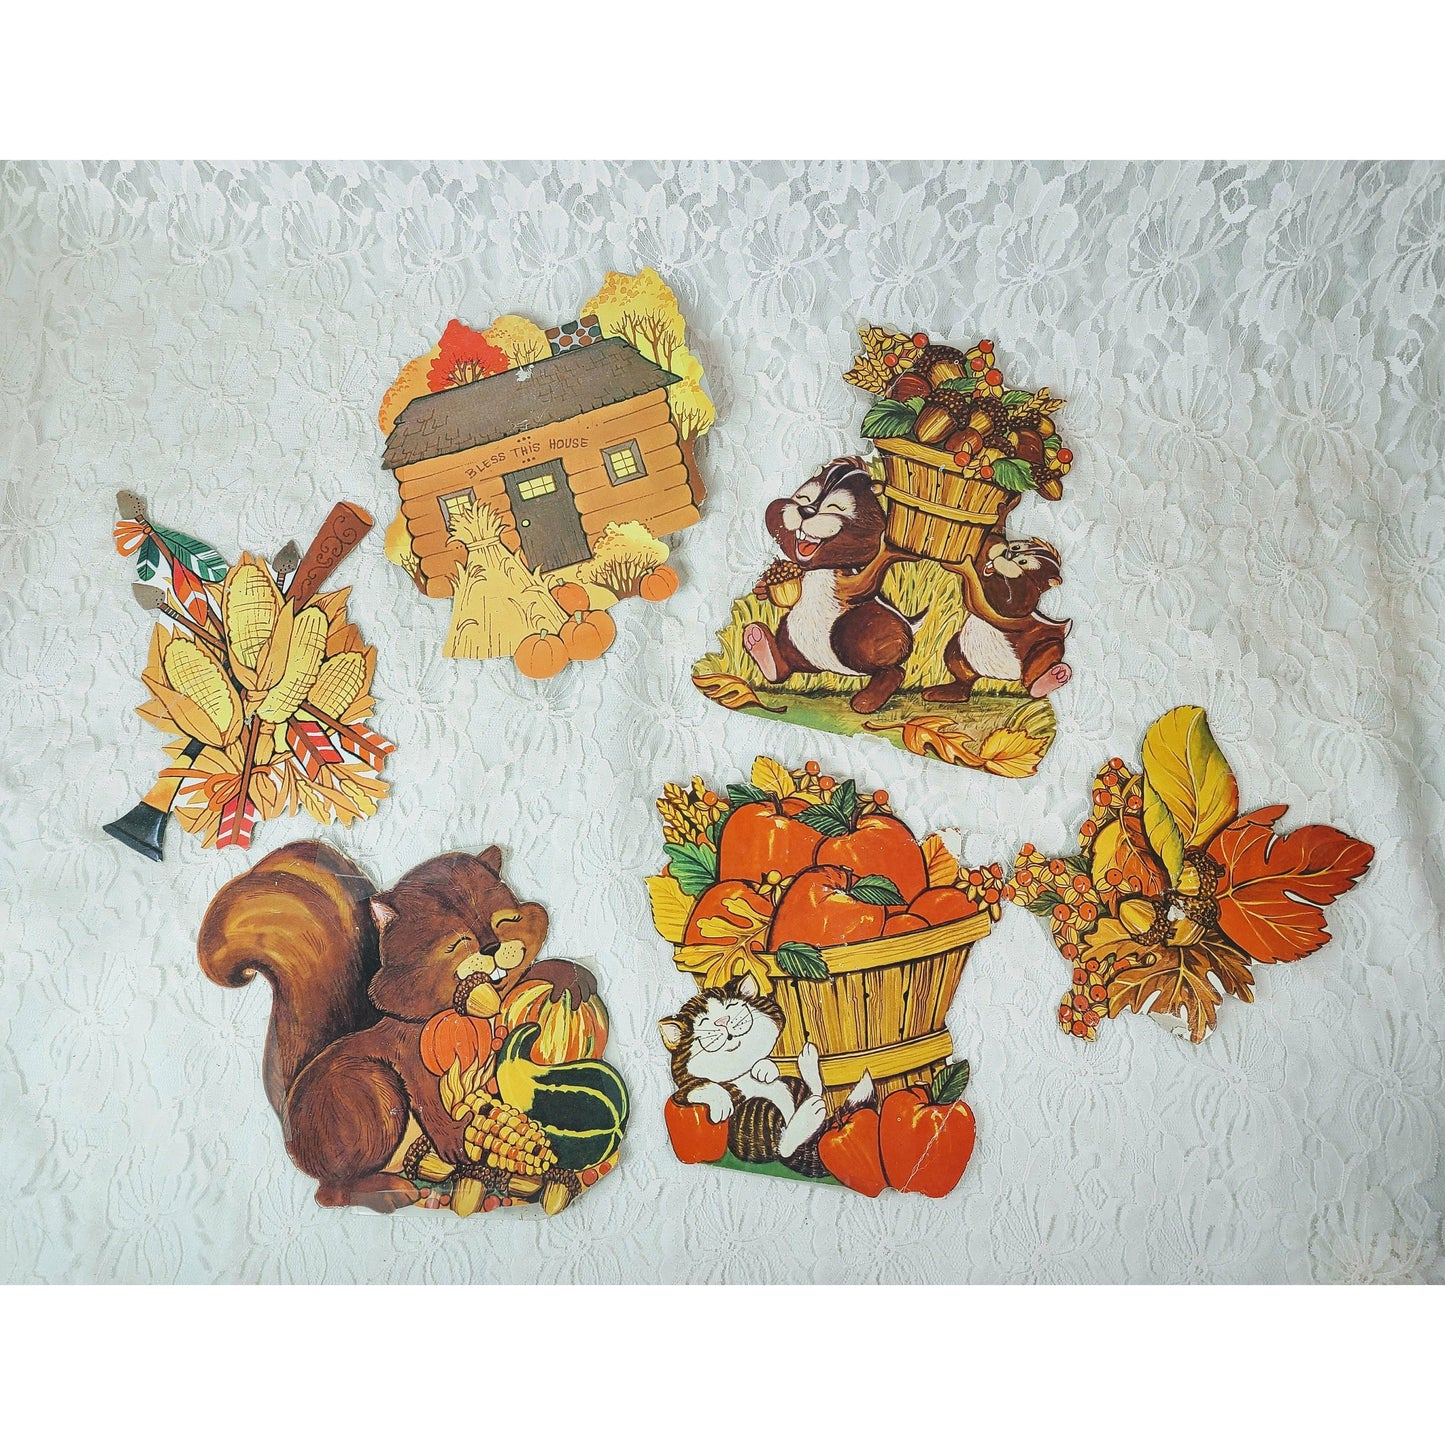 Vintage Ephemera Lot of 6 Fall Thanksgiving Large Size 5" by 5" Cardstock Cutouts from the 1970s